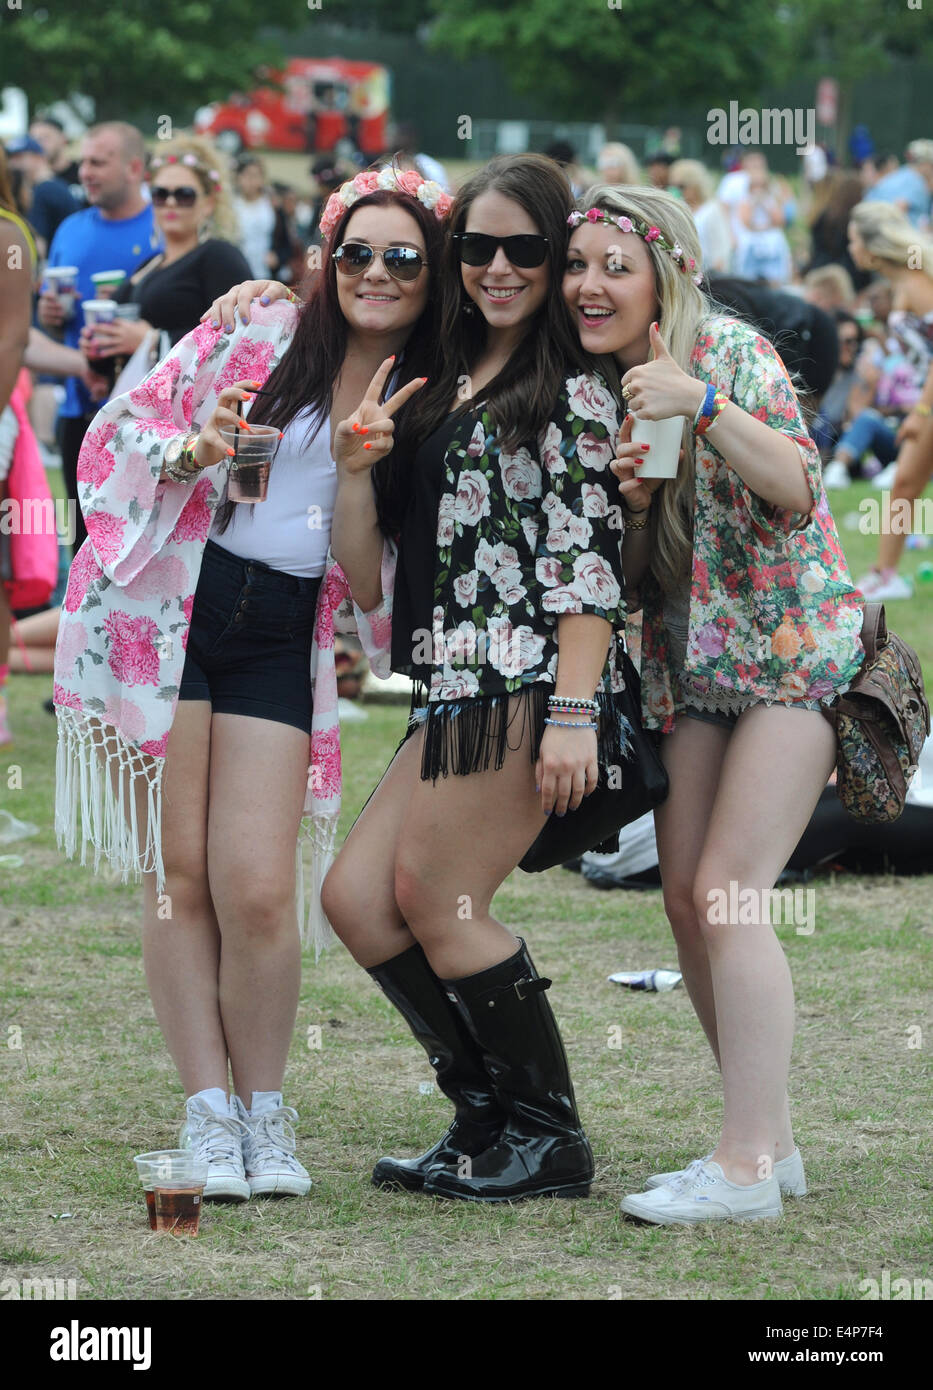 YOUNG PEOPLE ENJOYING THEMSELVES AT A OUTDOOR MUSIC FESTIVAL RE SUMMER FESTIVALS ROCK SINGERS TEENAGERS SOCIAL EVENTS UK Stock Photo